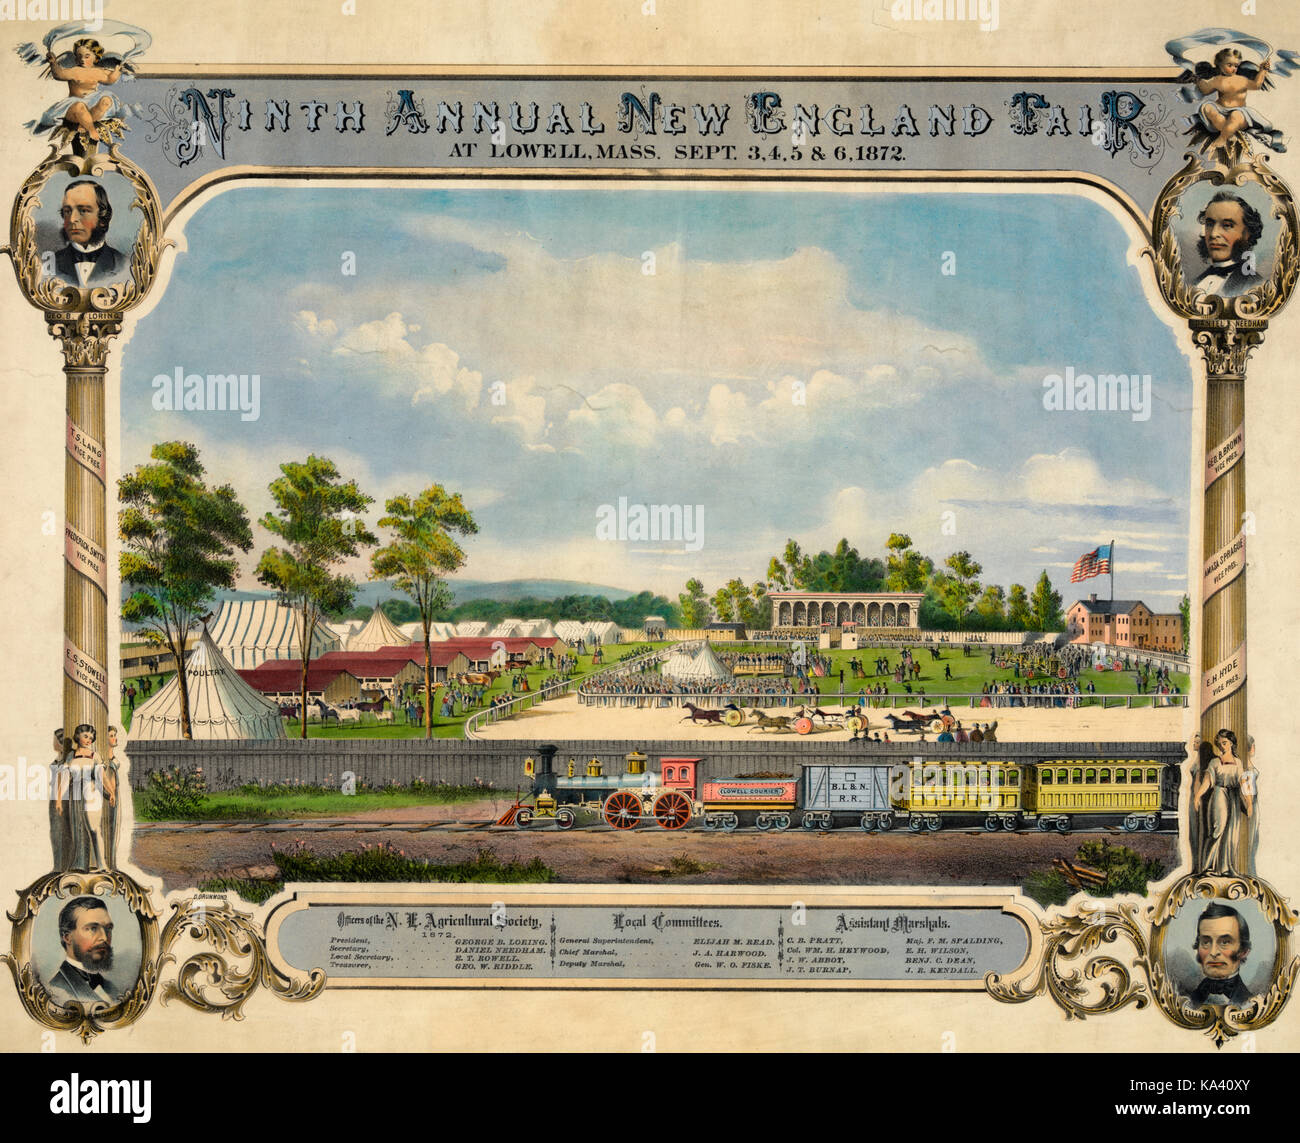 Ninth annual New England Fair, at Lowell, Mass., Sept. 3, 4, 5 & 6 1872. View of fairground, with horses racing, tents, and crowds, and railroad train in foreground, Lowell, Massachusetts. Stock Photo